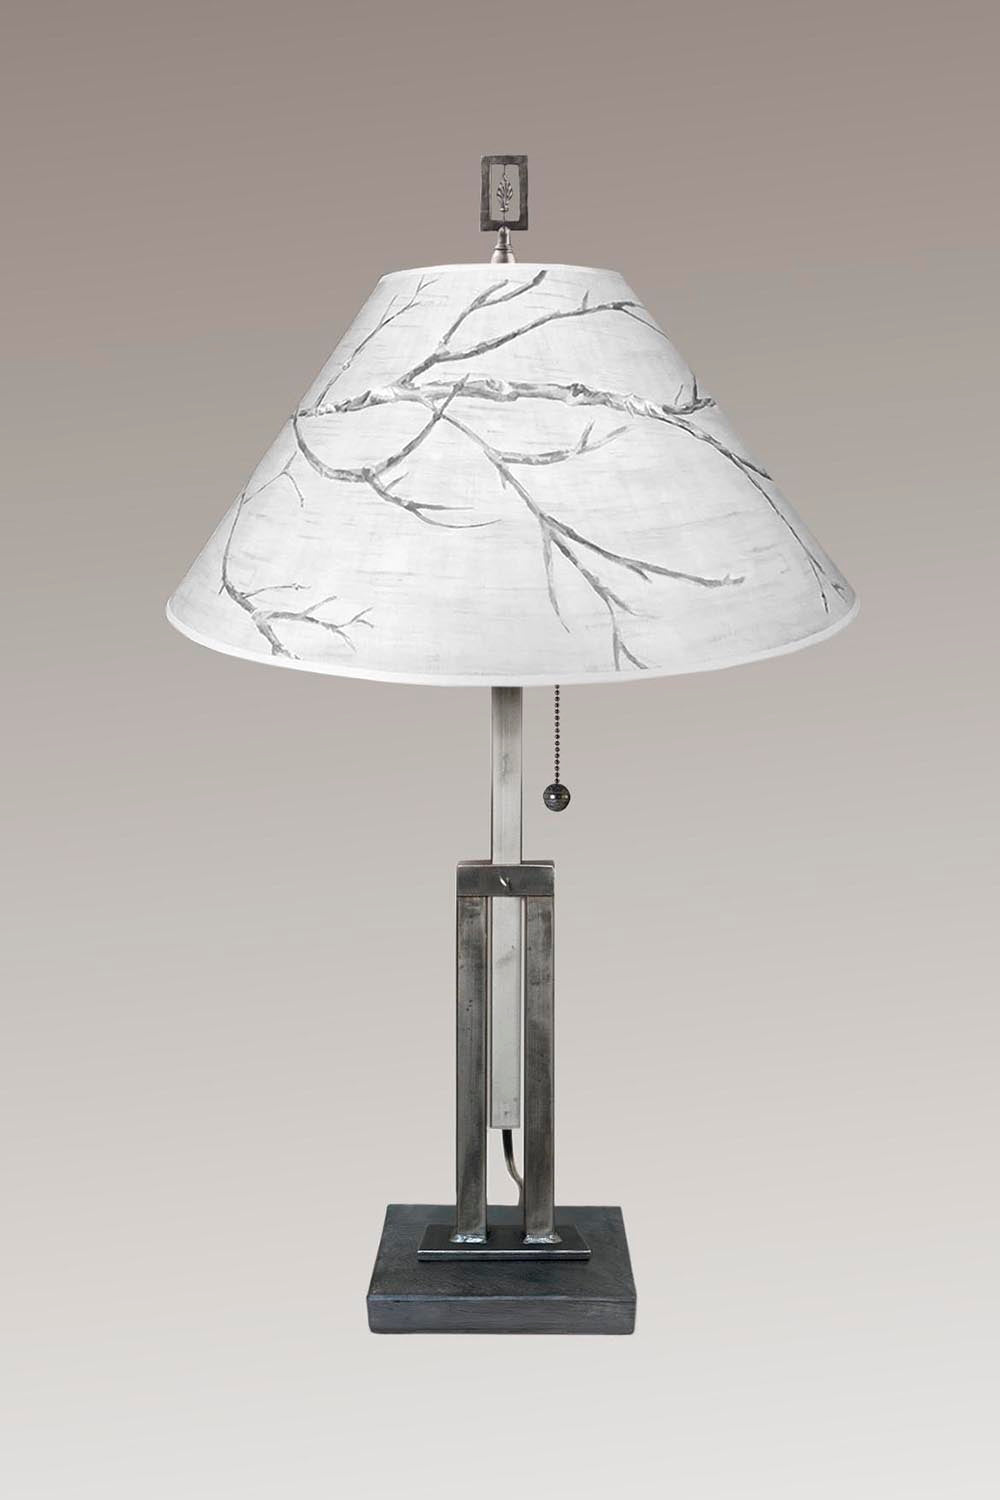 Janna Ugone &amp; Co Table Lamps Adjustable-Height Steel Table Lamp with Large Conical Shade in Sweeping Branch